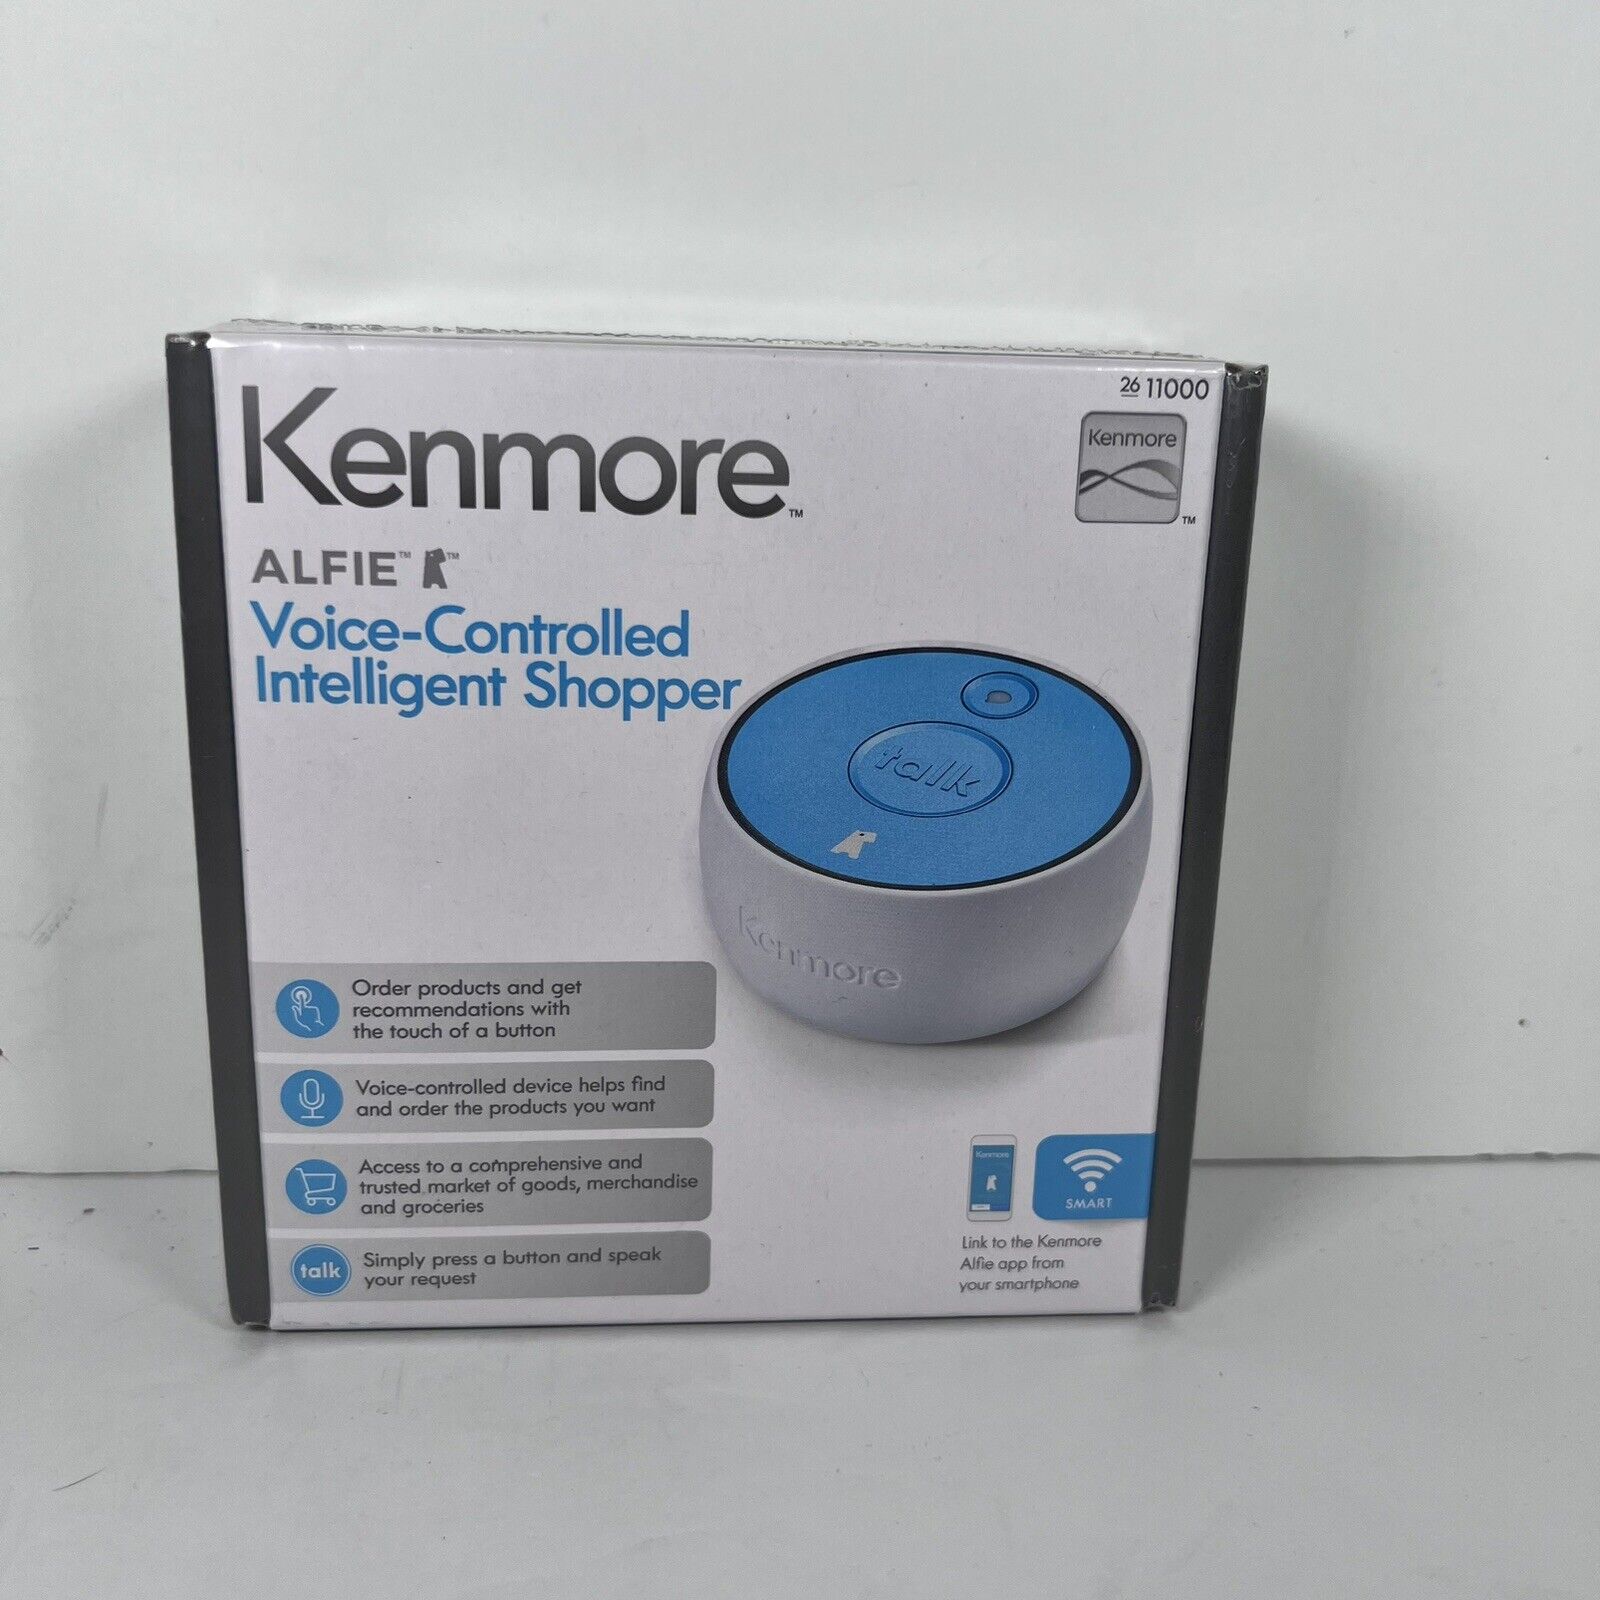 Kenmore Alfie Voice Controlled Intelligent Shopper - Brand New/Sealed